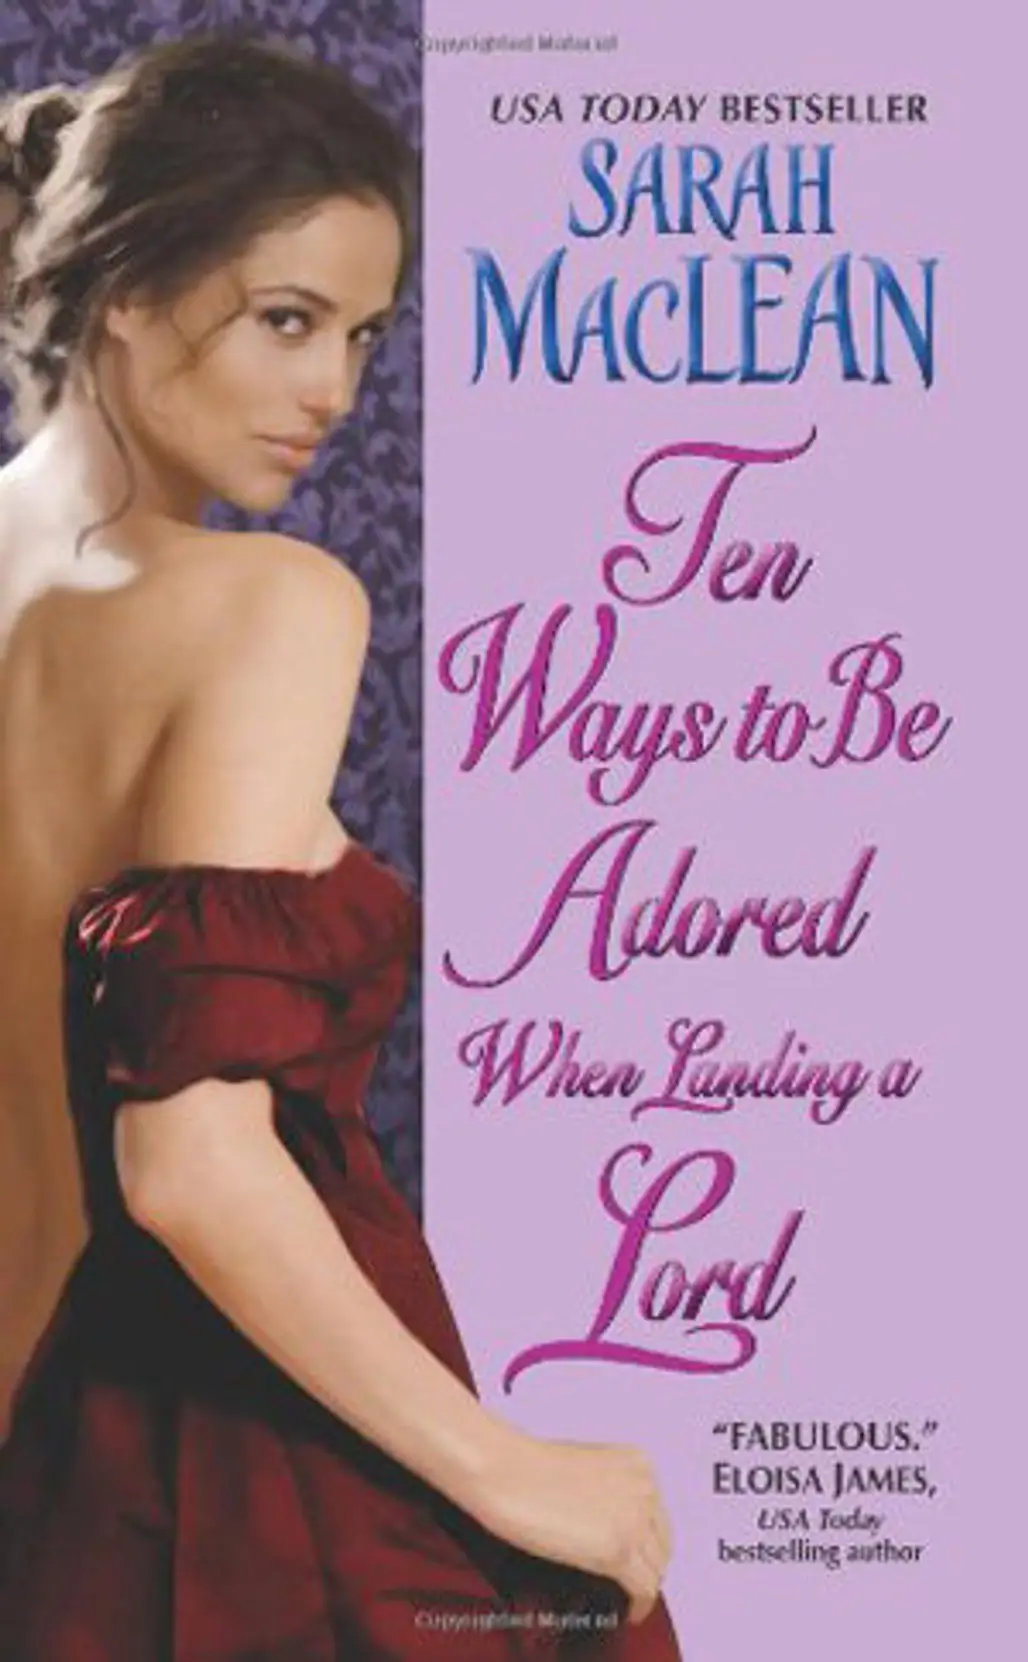 Ten Ways to Be Adored when Landing a Lord by Sarah McClean